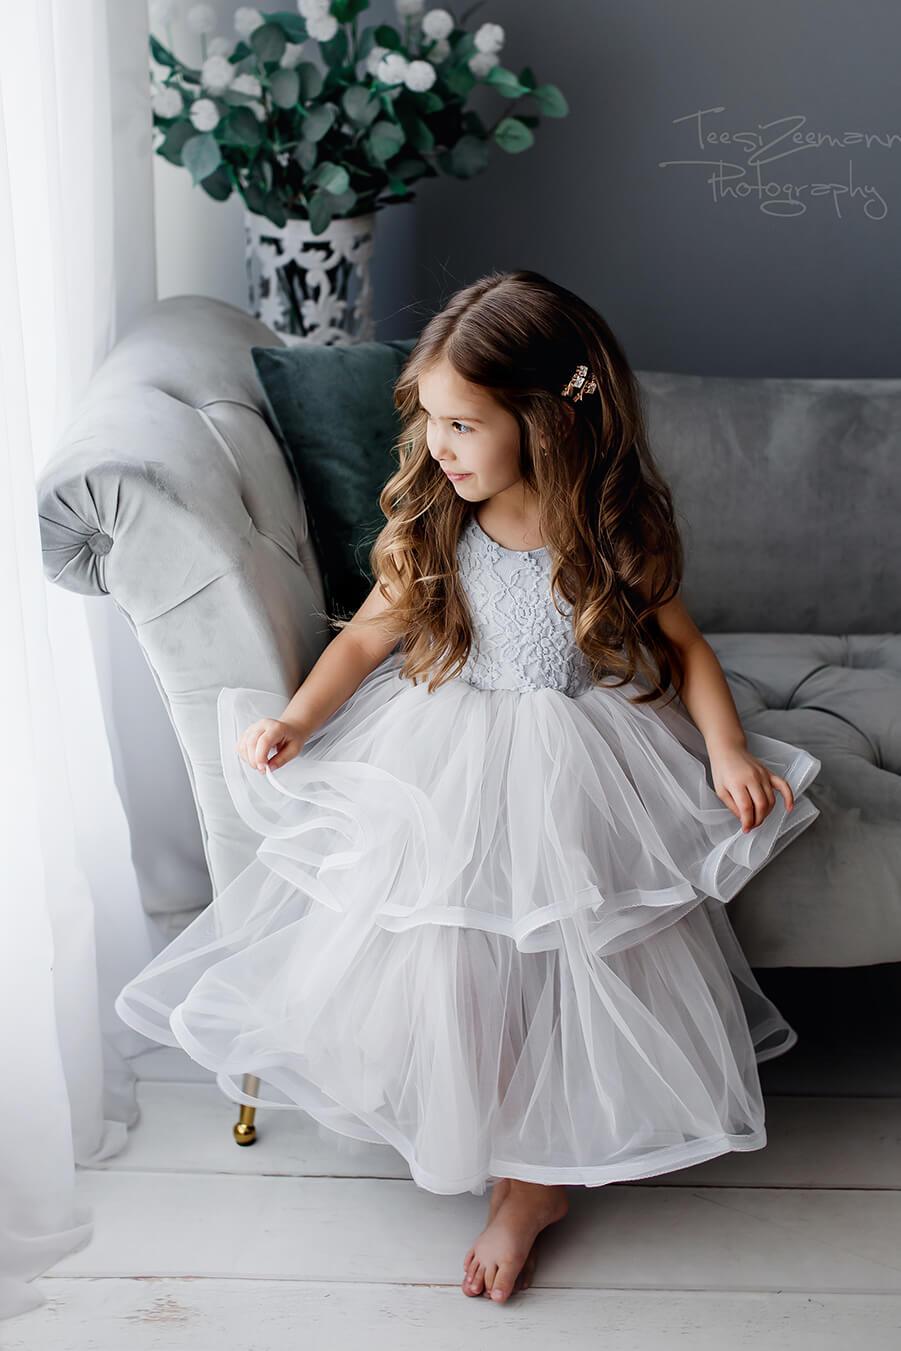 A little girl is sitting on the couch wearing a grey tulle dress. She has brown hair